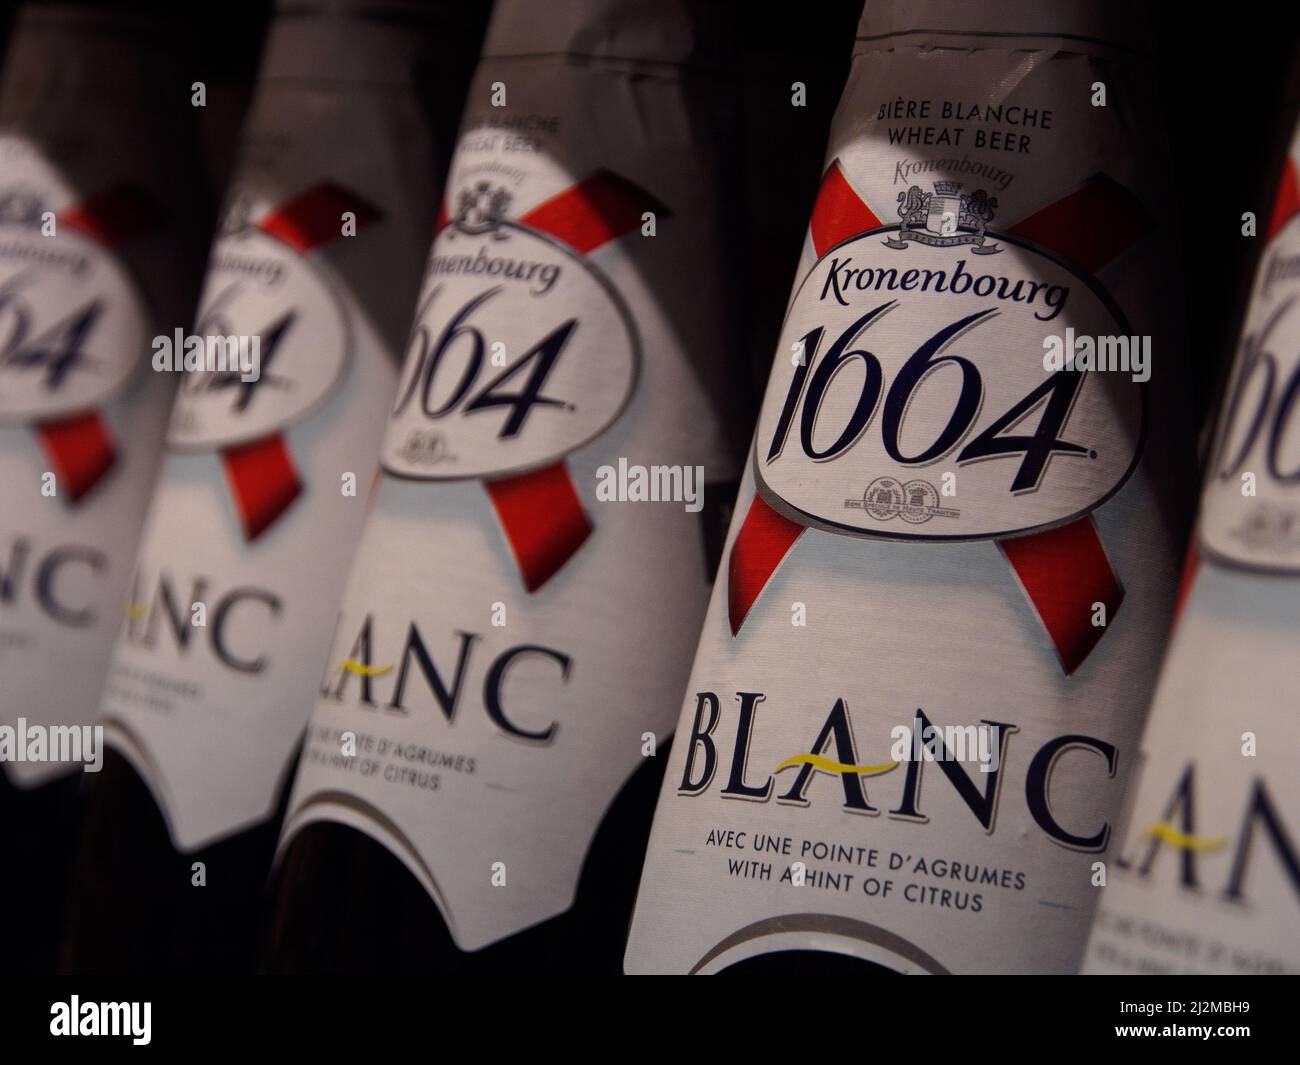 Moscow, Russia. 31st Mar, 2022. The Kronenbourg 1664 logo on beer bottles. It was reported that Carlsberg Group is leaving the Russian market and plans to transfer the local business to a new investor. The Danish brewing company 'Carlsberg' is represented in Russia by the brands 'Carlsberg', 'Kronenbourg', 'Holsten' and 'Tuborg' (Photo by Alexander Sayganov/SOPA Images/Sipa USA) Credit: Sipa USA/Alamy Live News Stock Photo